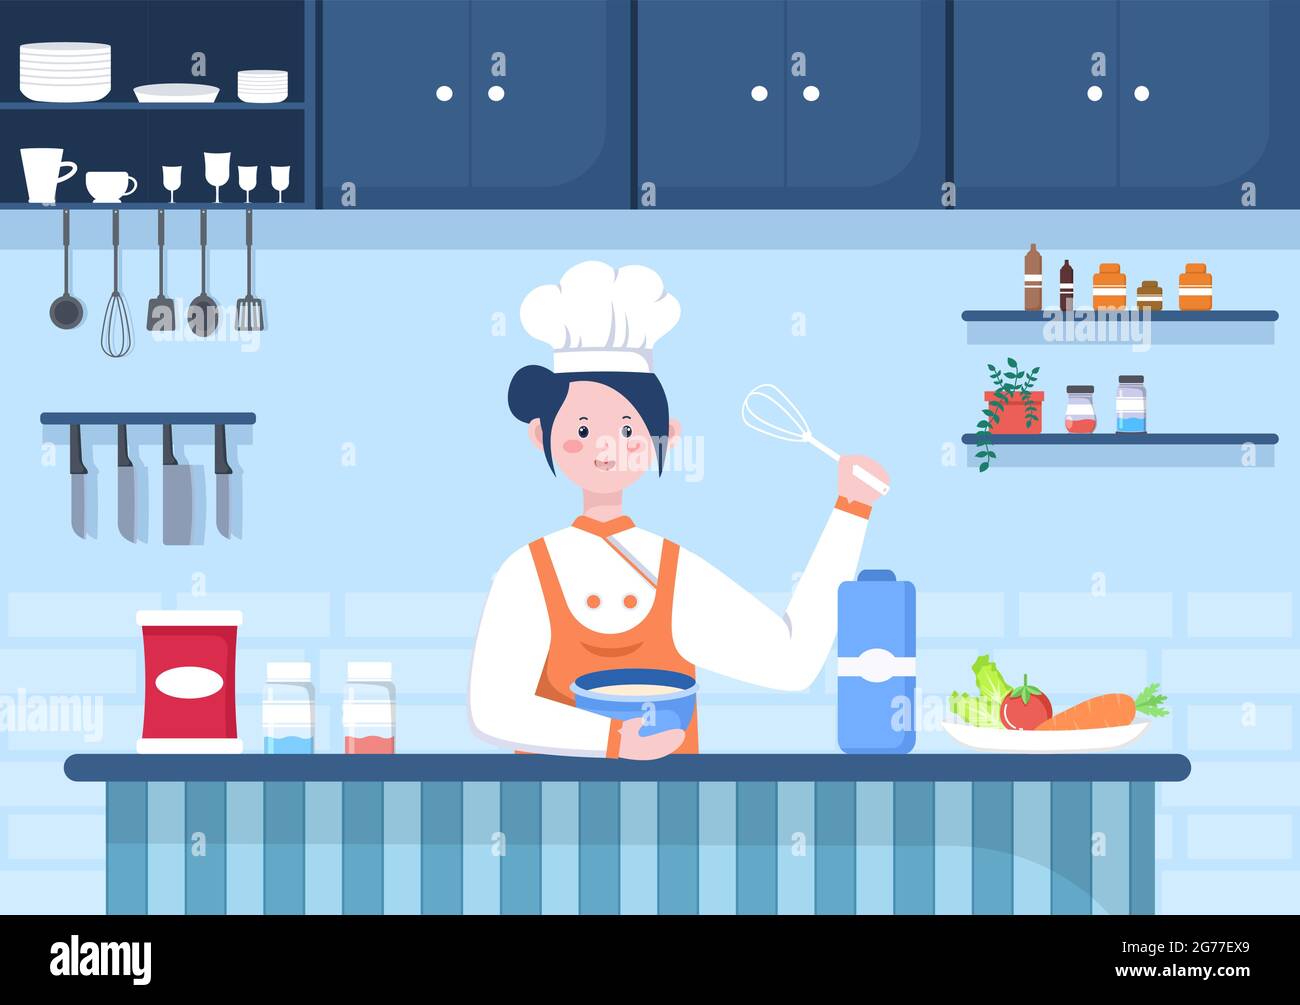 Chef Is Cooking In The Kitchen With Tray, ingredients or Different Meals. Interior Furniture And Utensils Background Landing Page Illustration Stock Vector